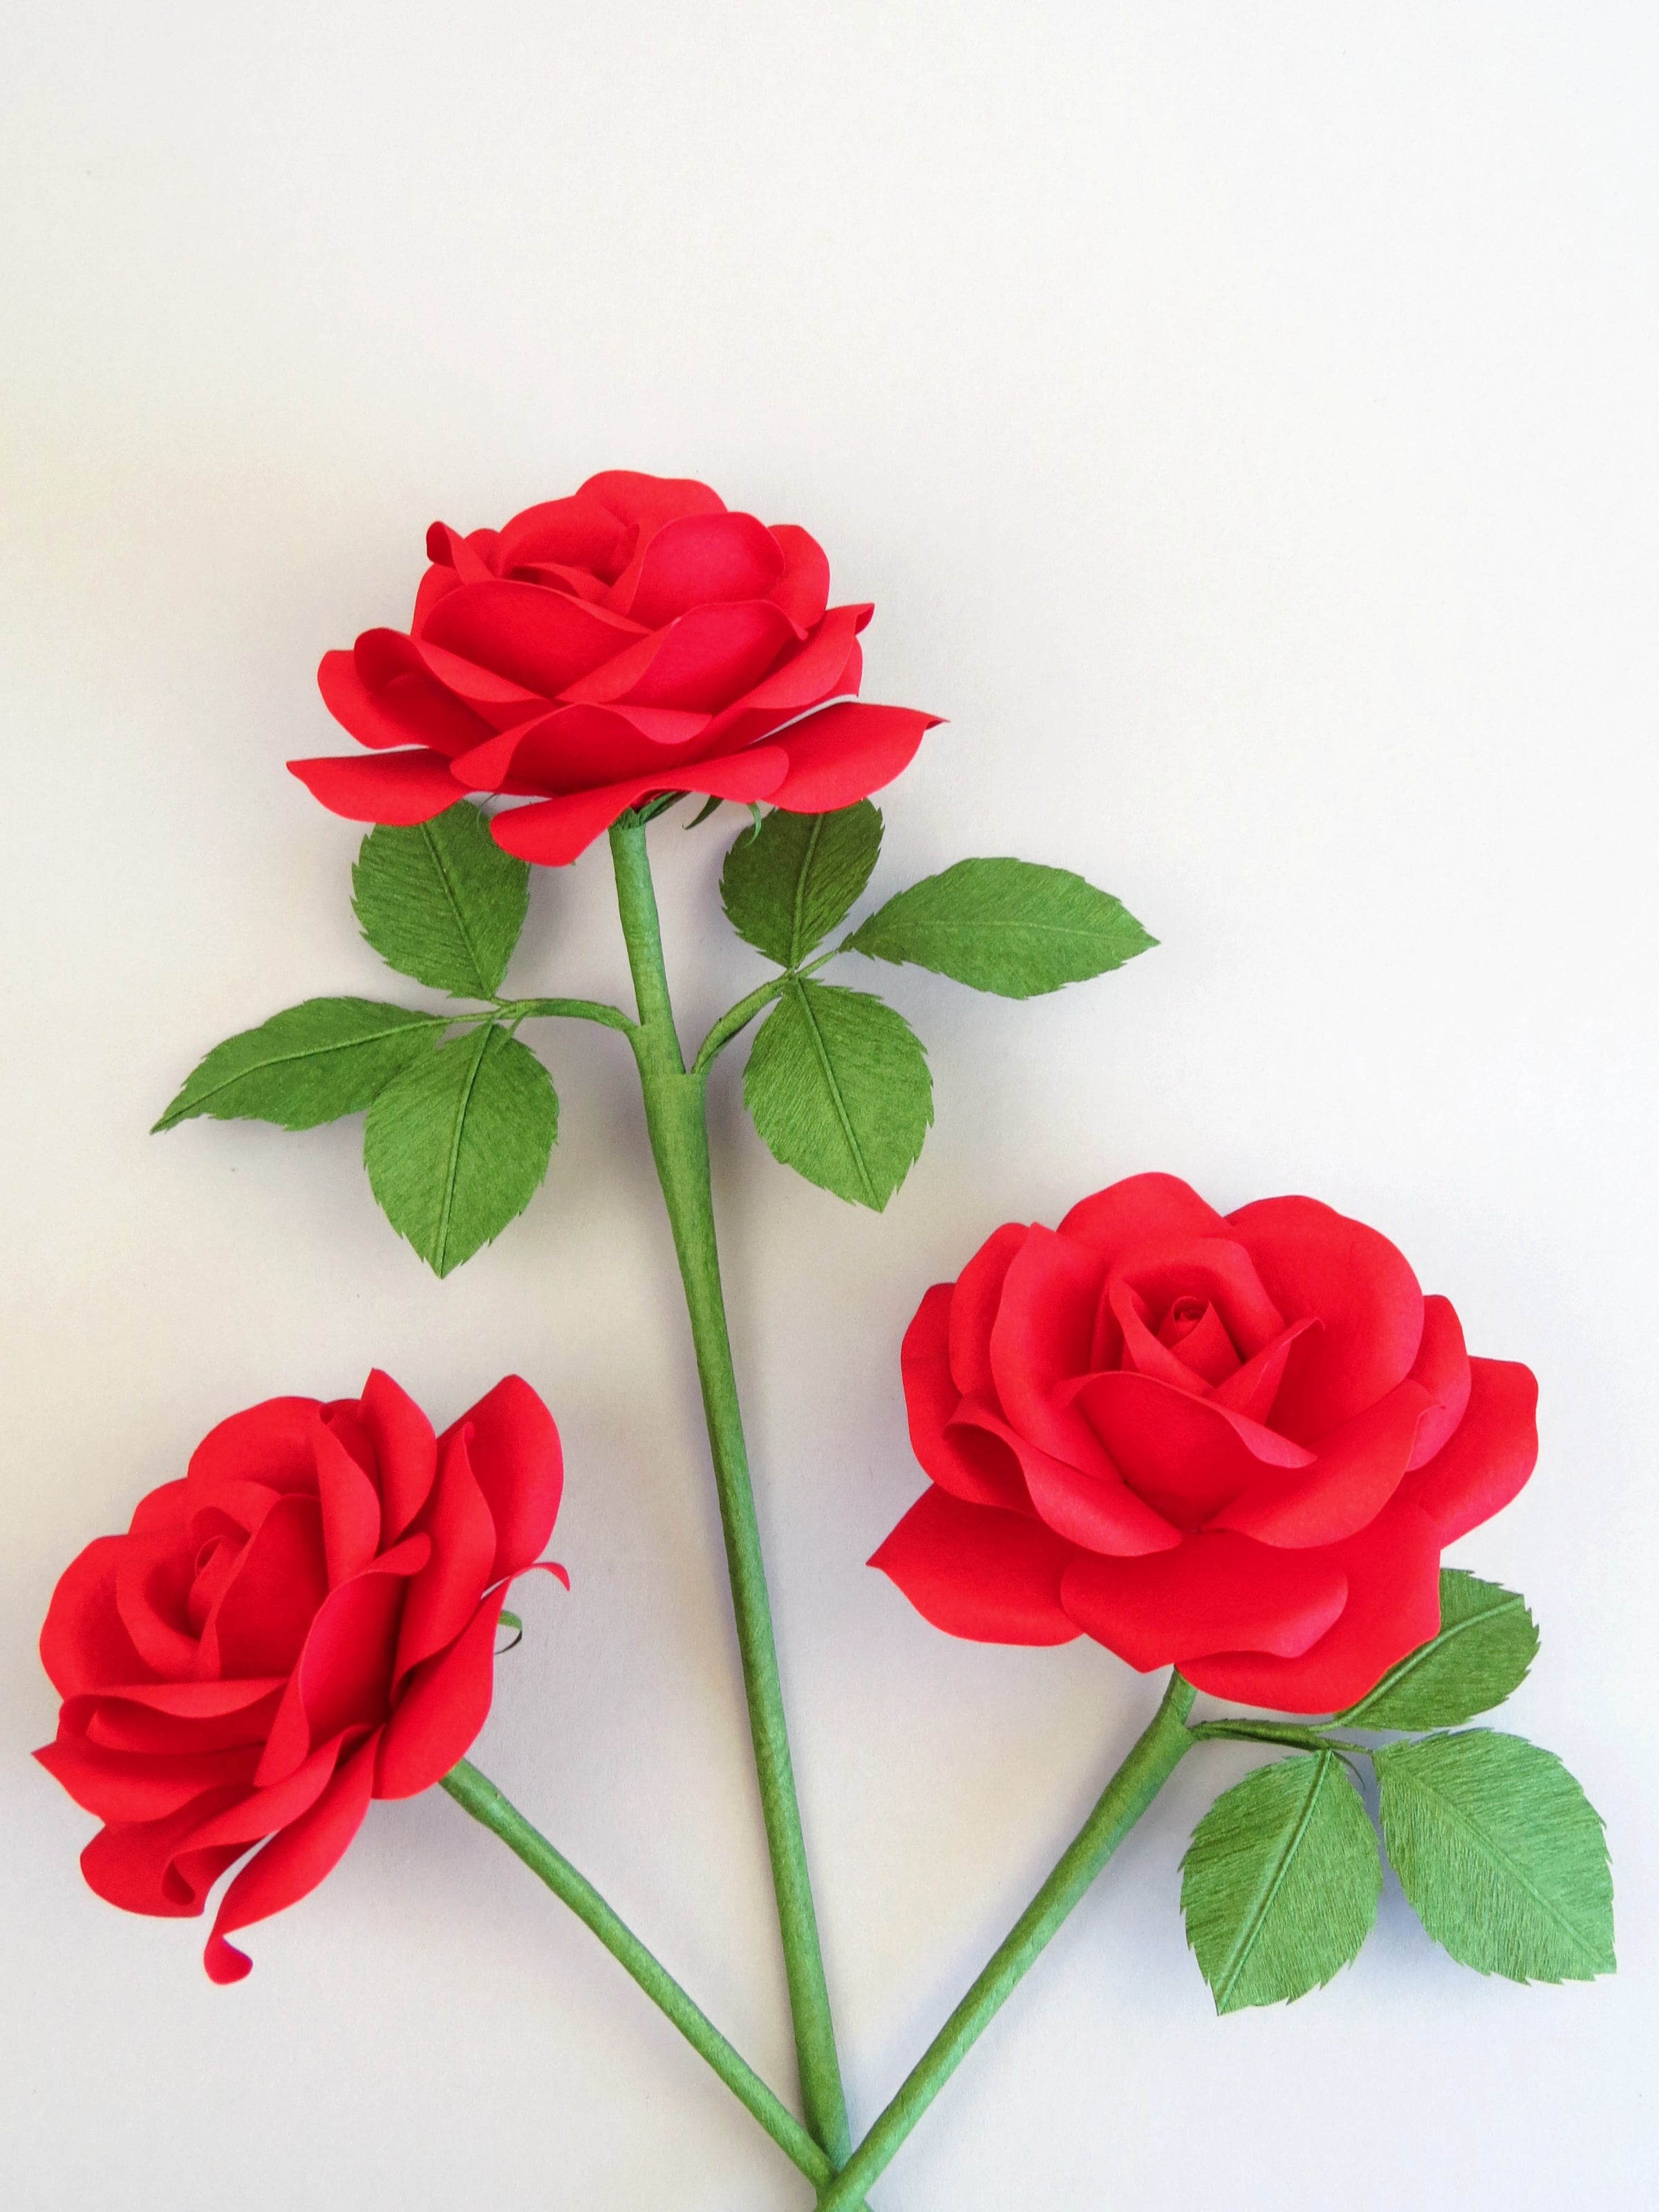 Three red cotton paper roses randomly lying next to each other on a white background. The left rose has no leaves, the middle rose has six green leaves attached and the right rose has three leaves